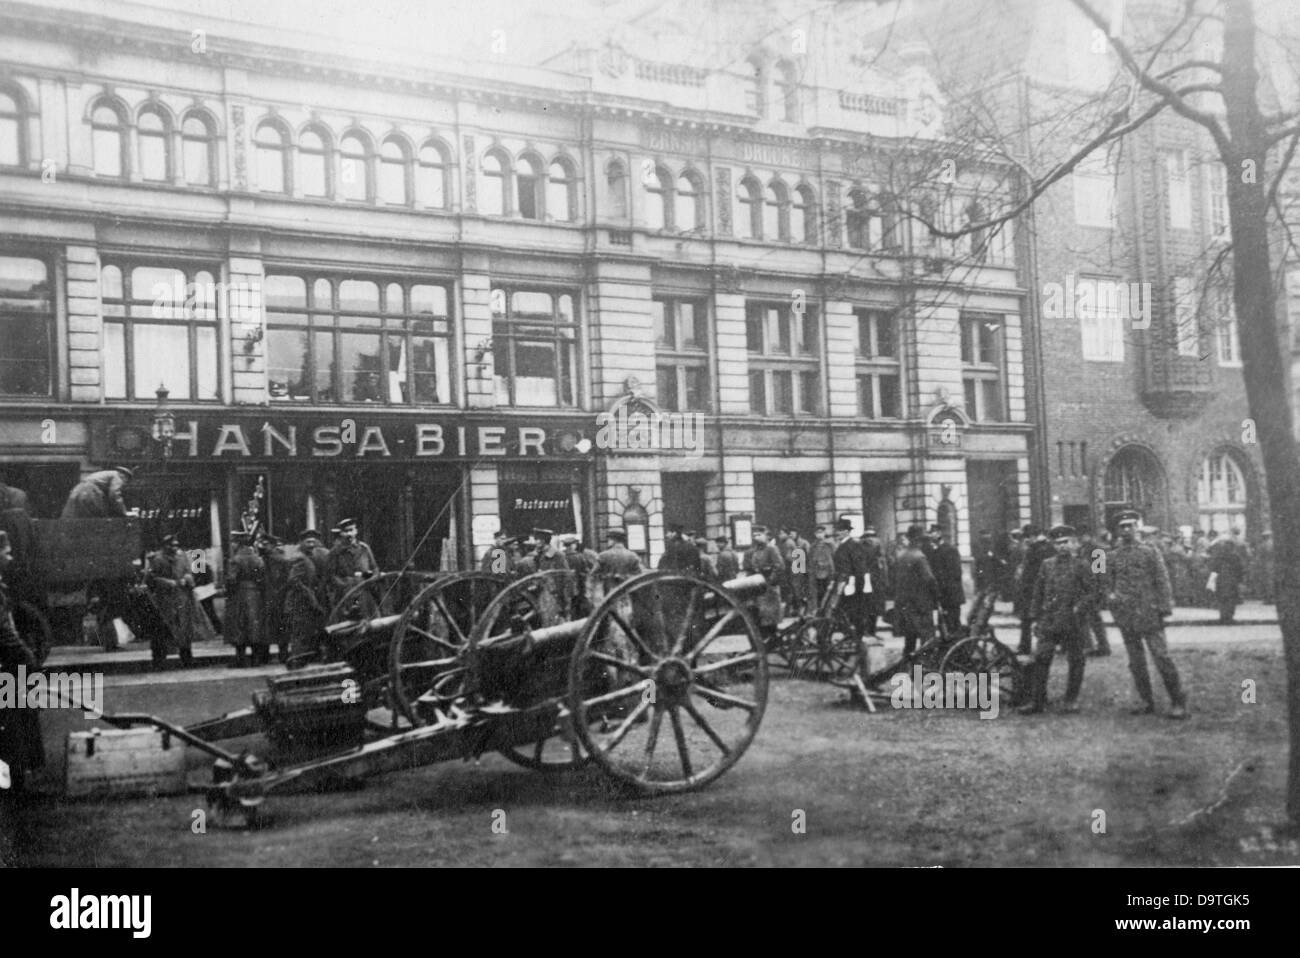 German troops and guns are pictured in the streets of St. Pauli in Hamburg, Germany, in early 1918. German civilians suffered from poor food supply and bad working conditions during World War I, which led to mass strikes and demonstrations in January 1918, which were supressed by the government with violent means. Fotoarchiv für Zeitgeschichte Stock Photo